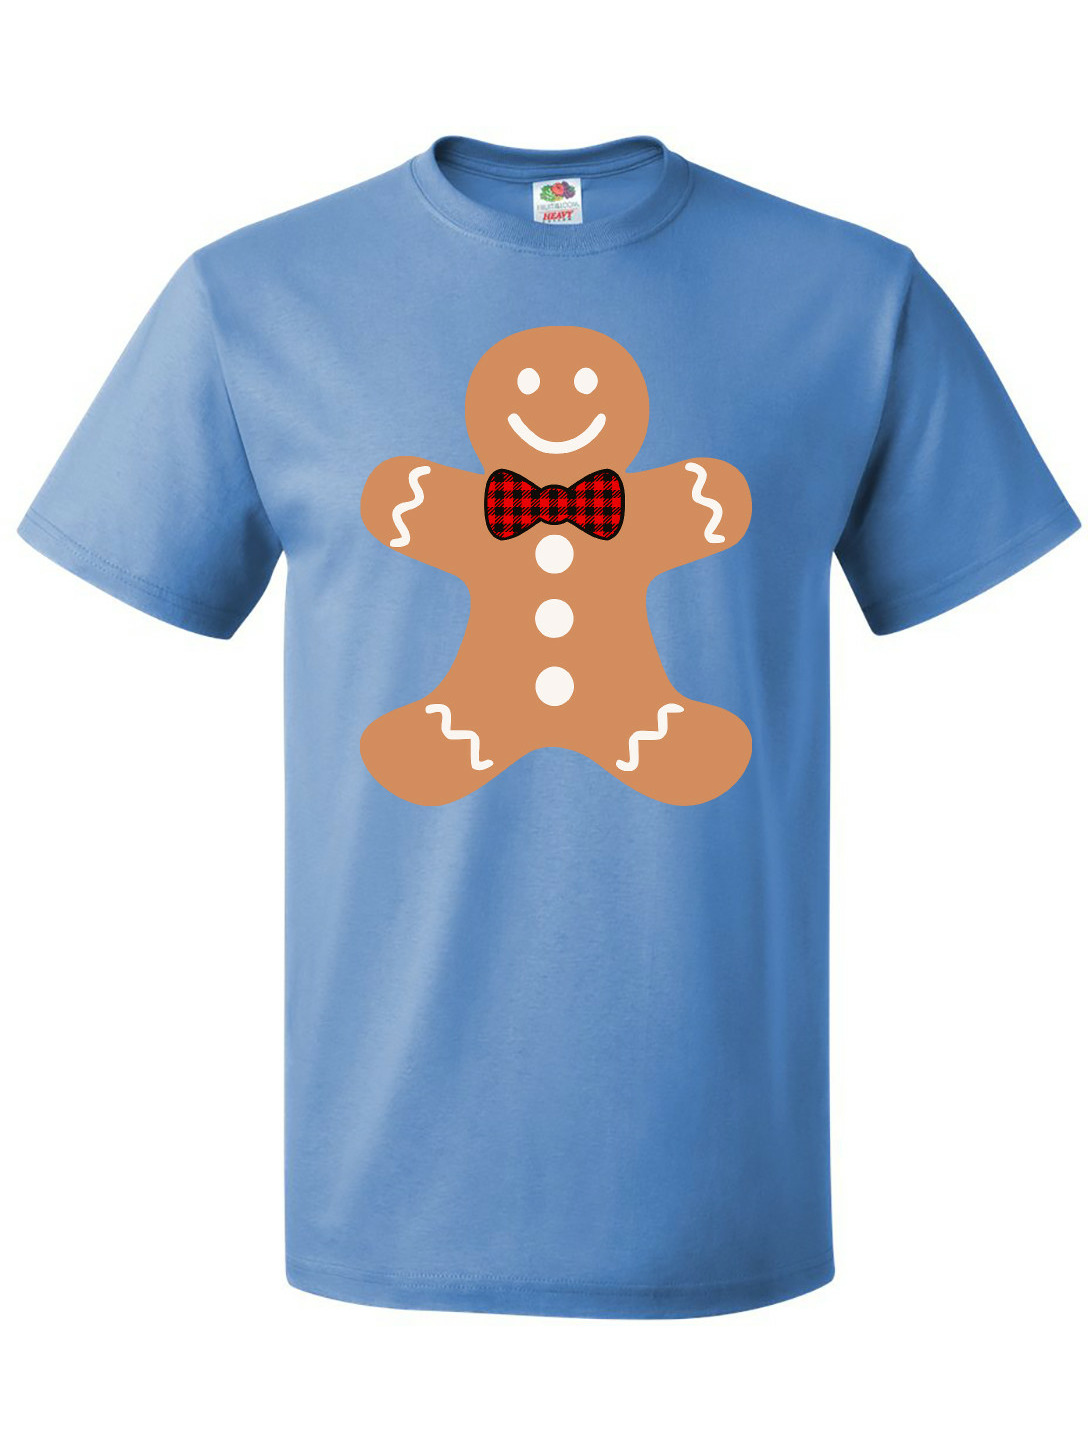 Inktastic Cute Gingerbread Man with Red Plaid Bowtie T-Shirt - image 1 of 4